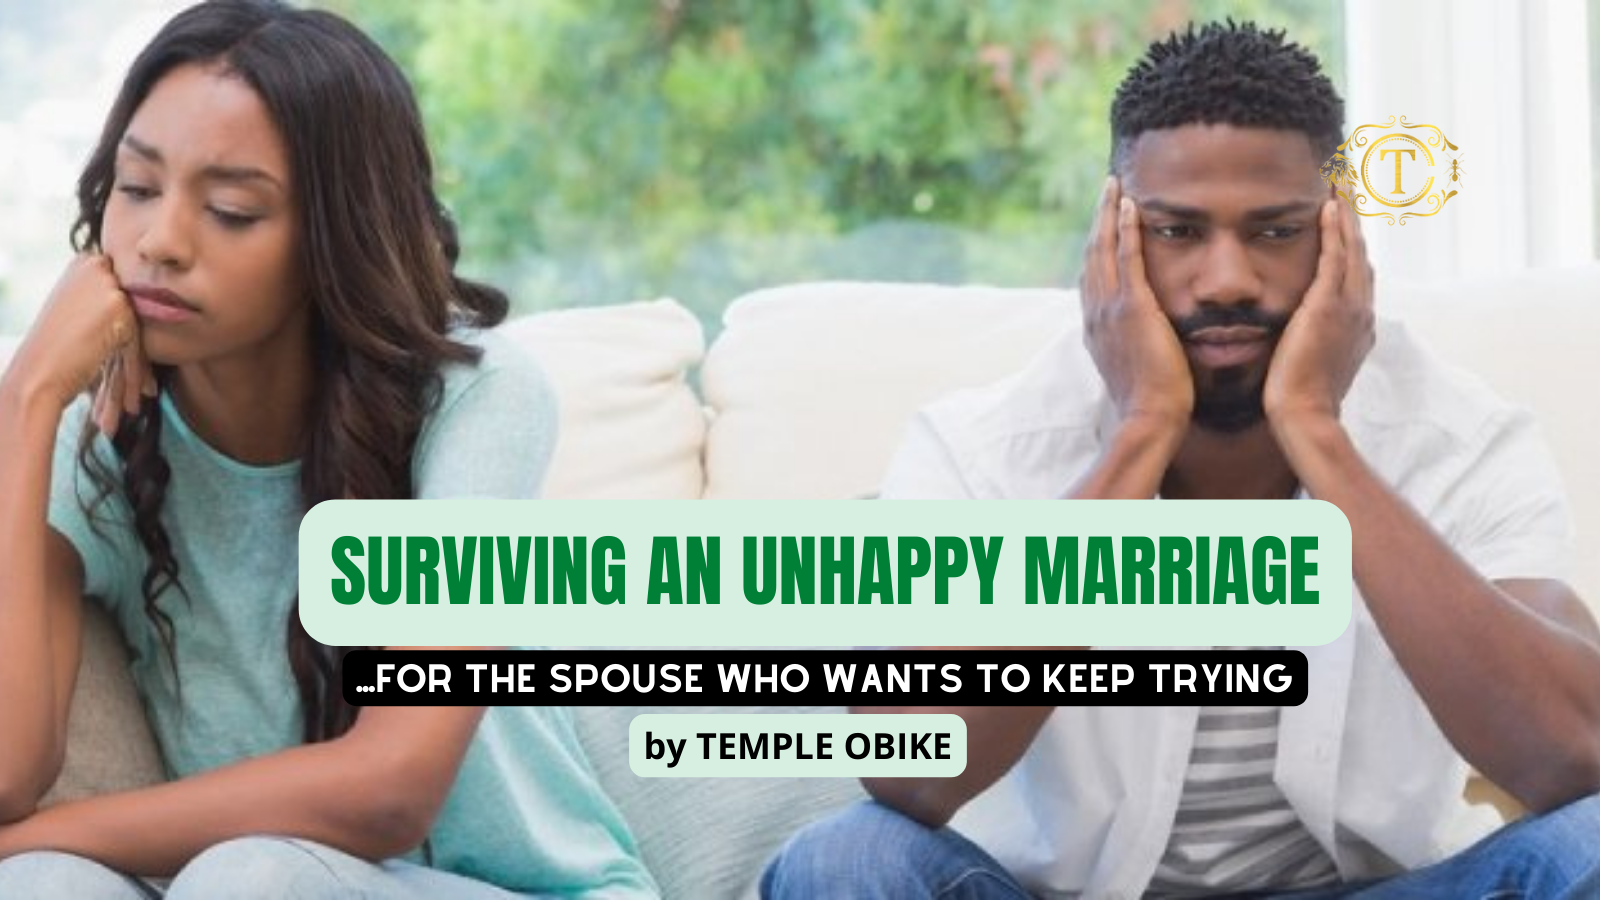 How To Survive An Unhappy Marriage For The Spouse Who Wants To Keep Trying Tcma 6892